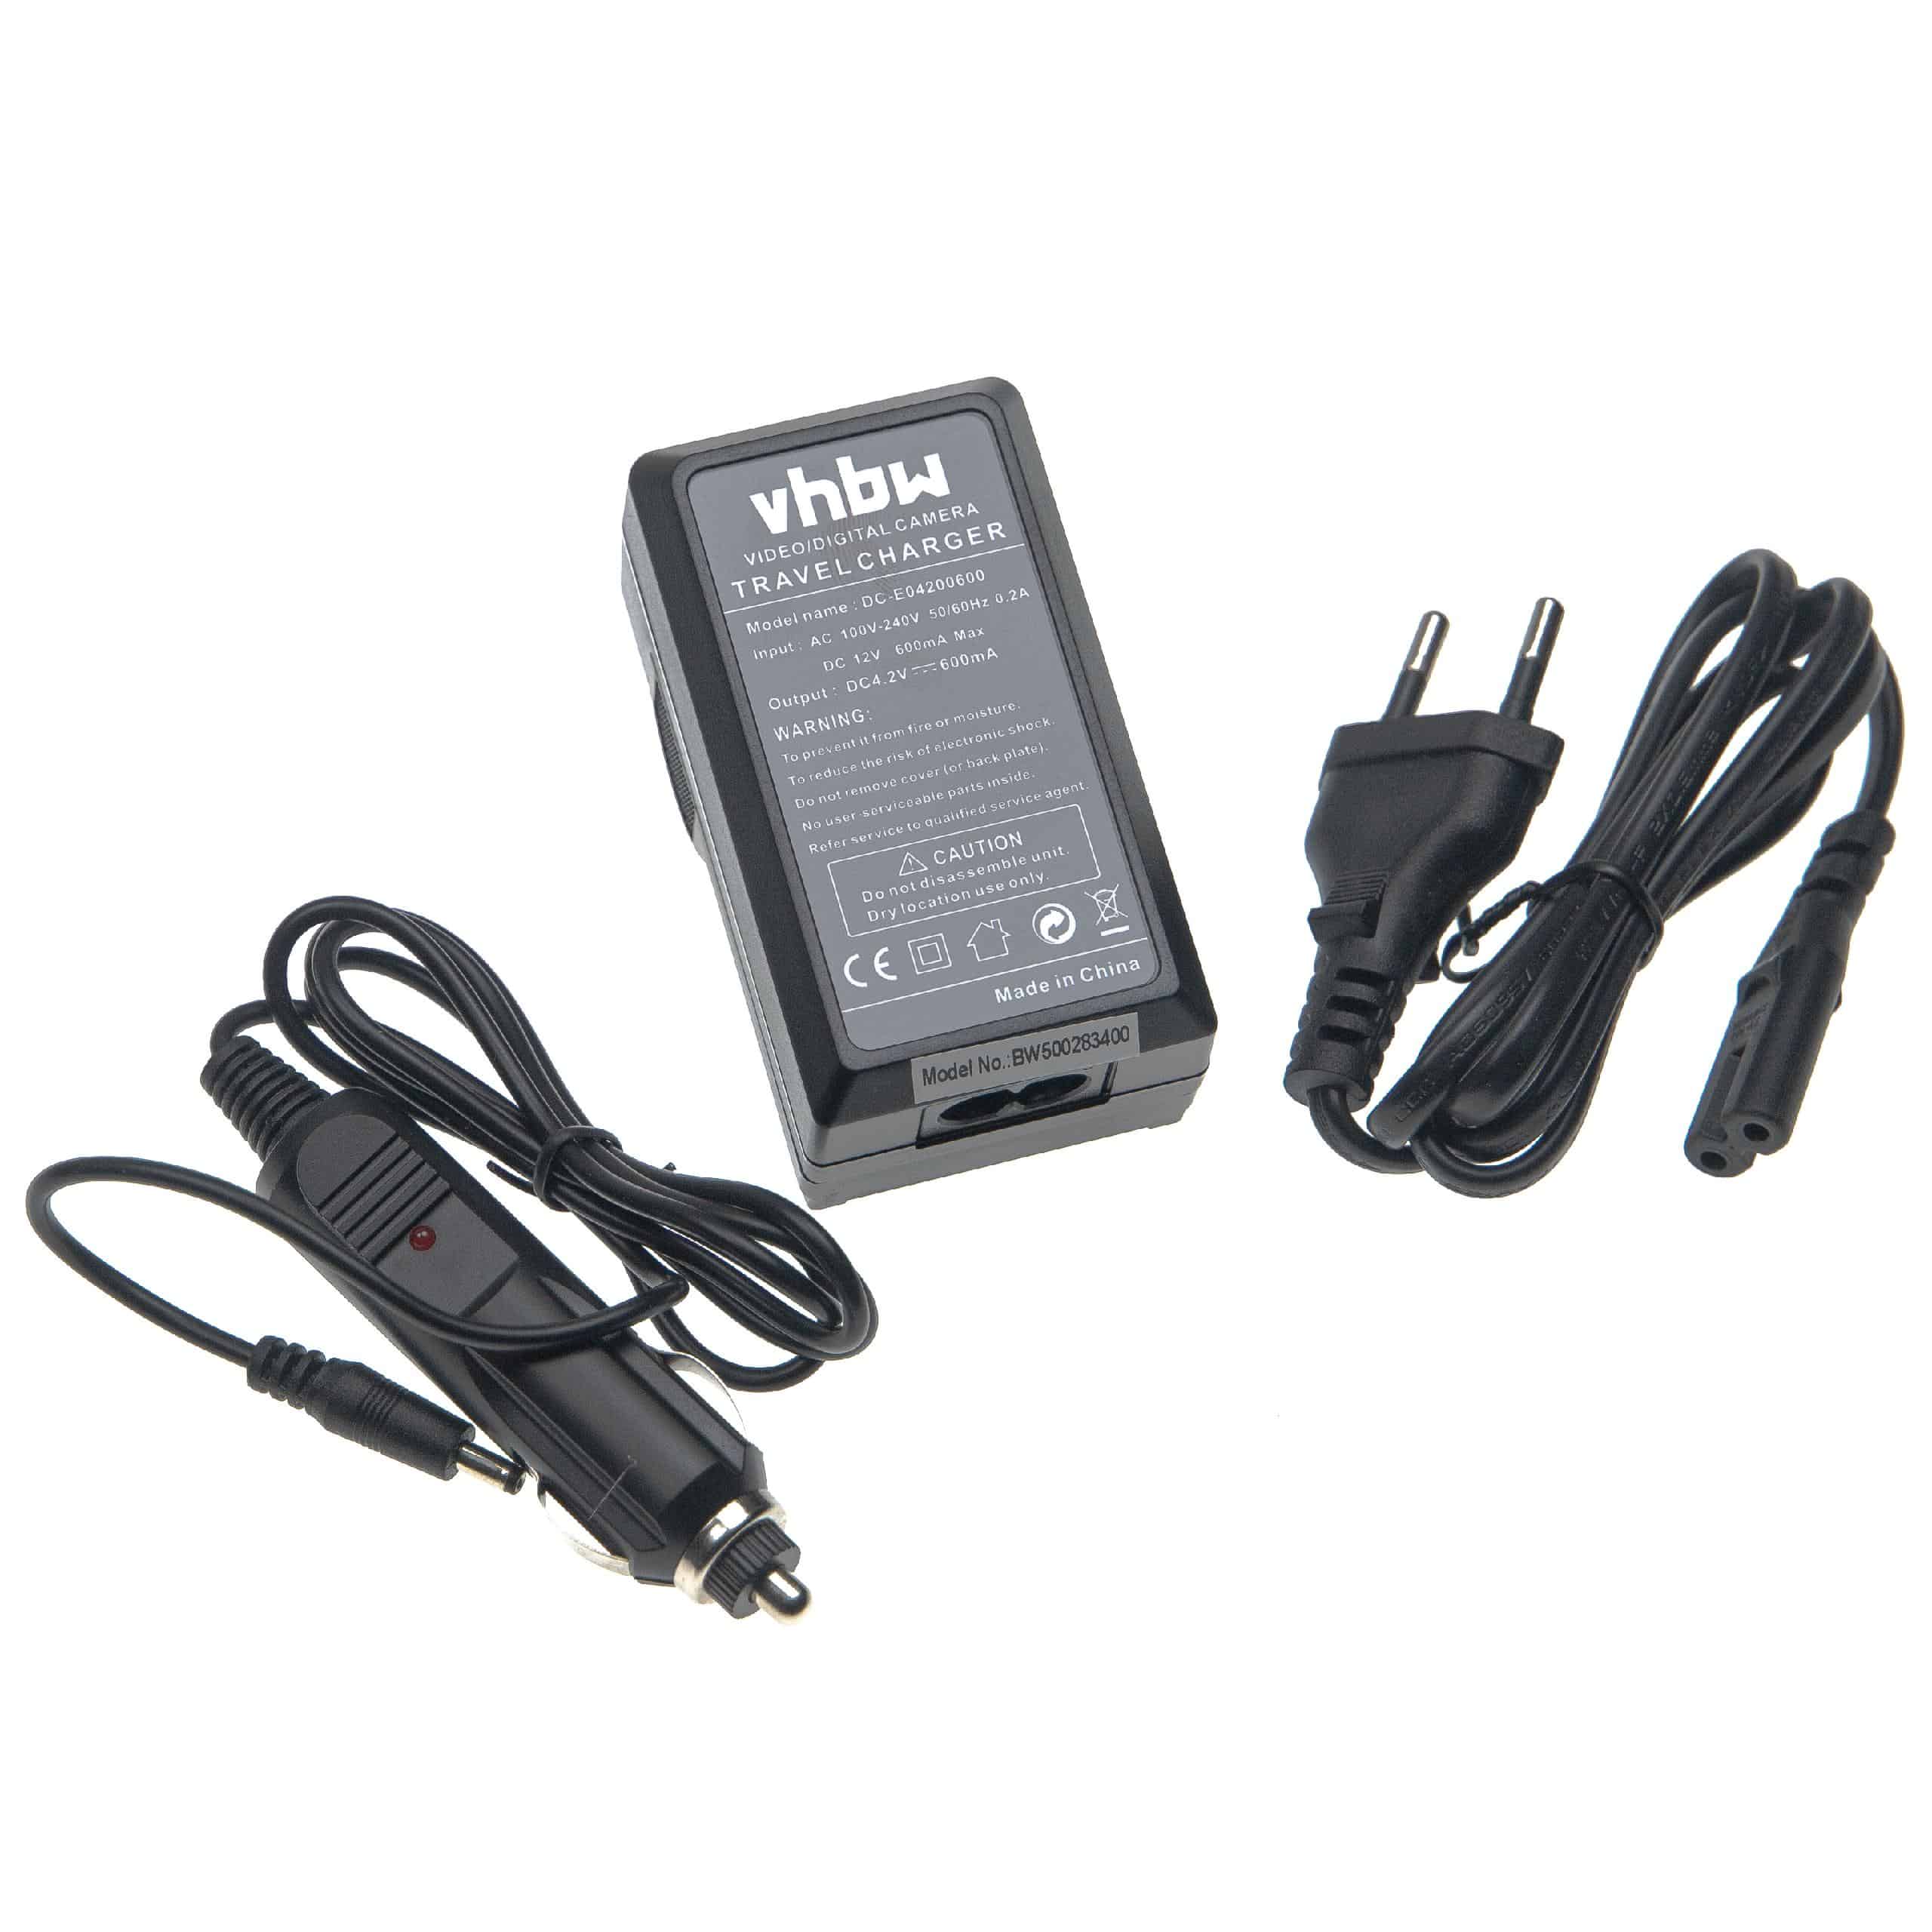 Battery Charger suitable for Samsung SLB-0937 Camera etc. - 0.6 A, 4.2 V